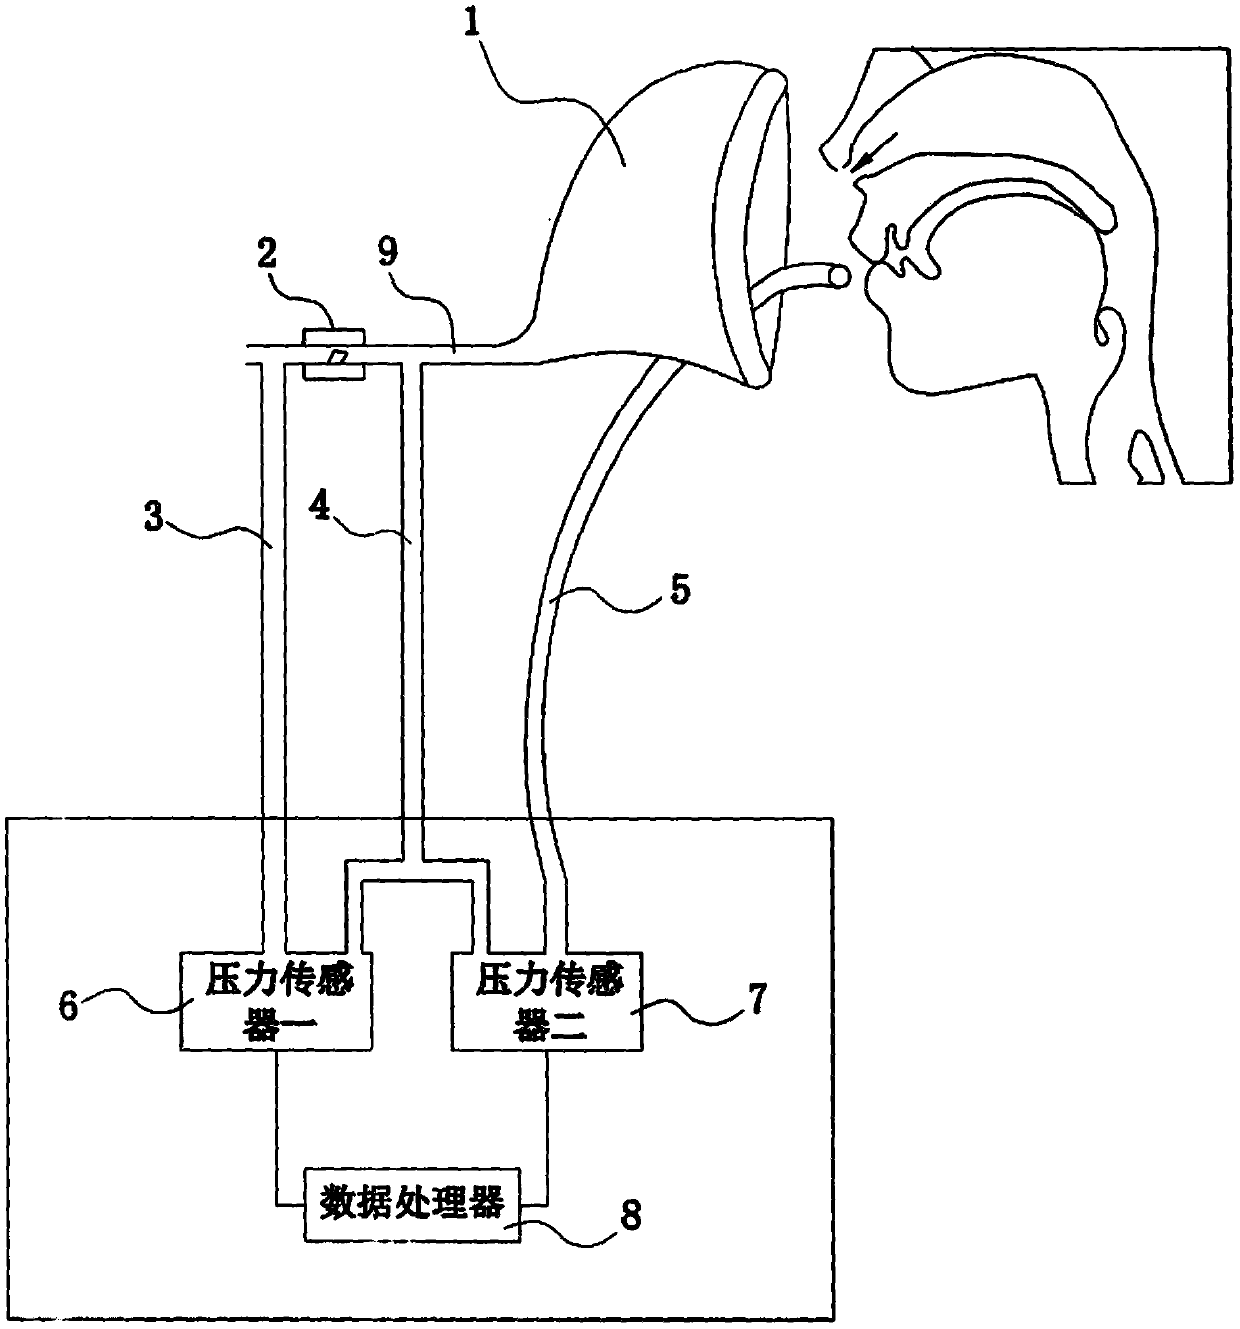 Nasal resistance testing device and method